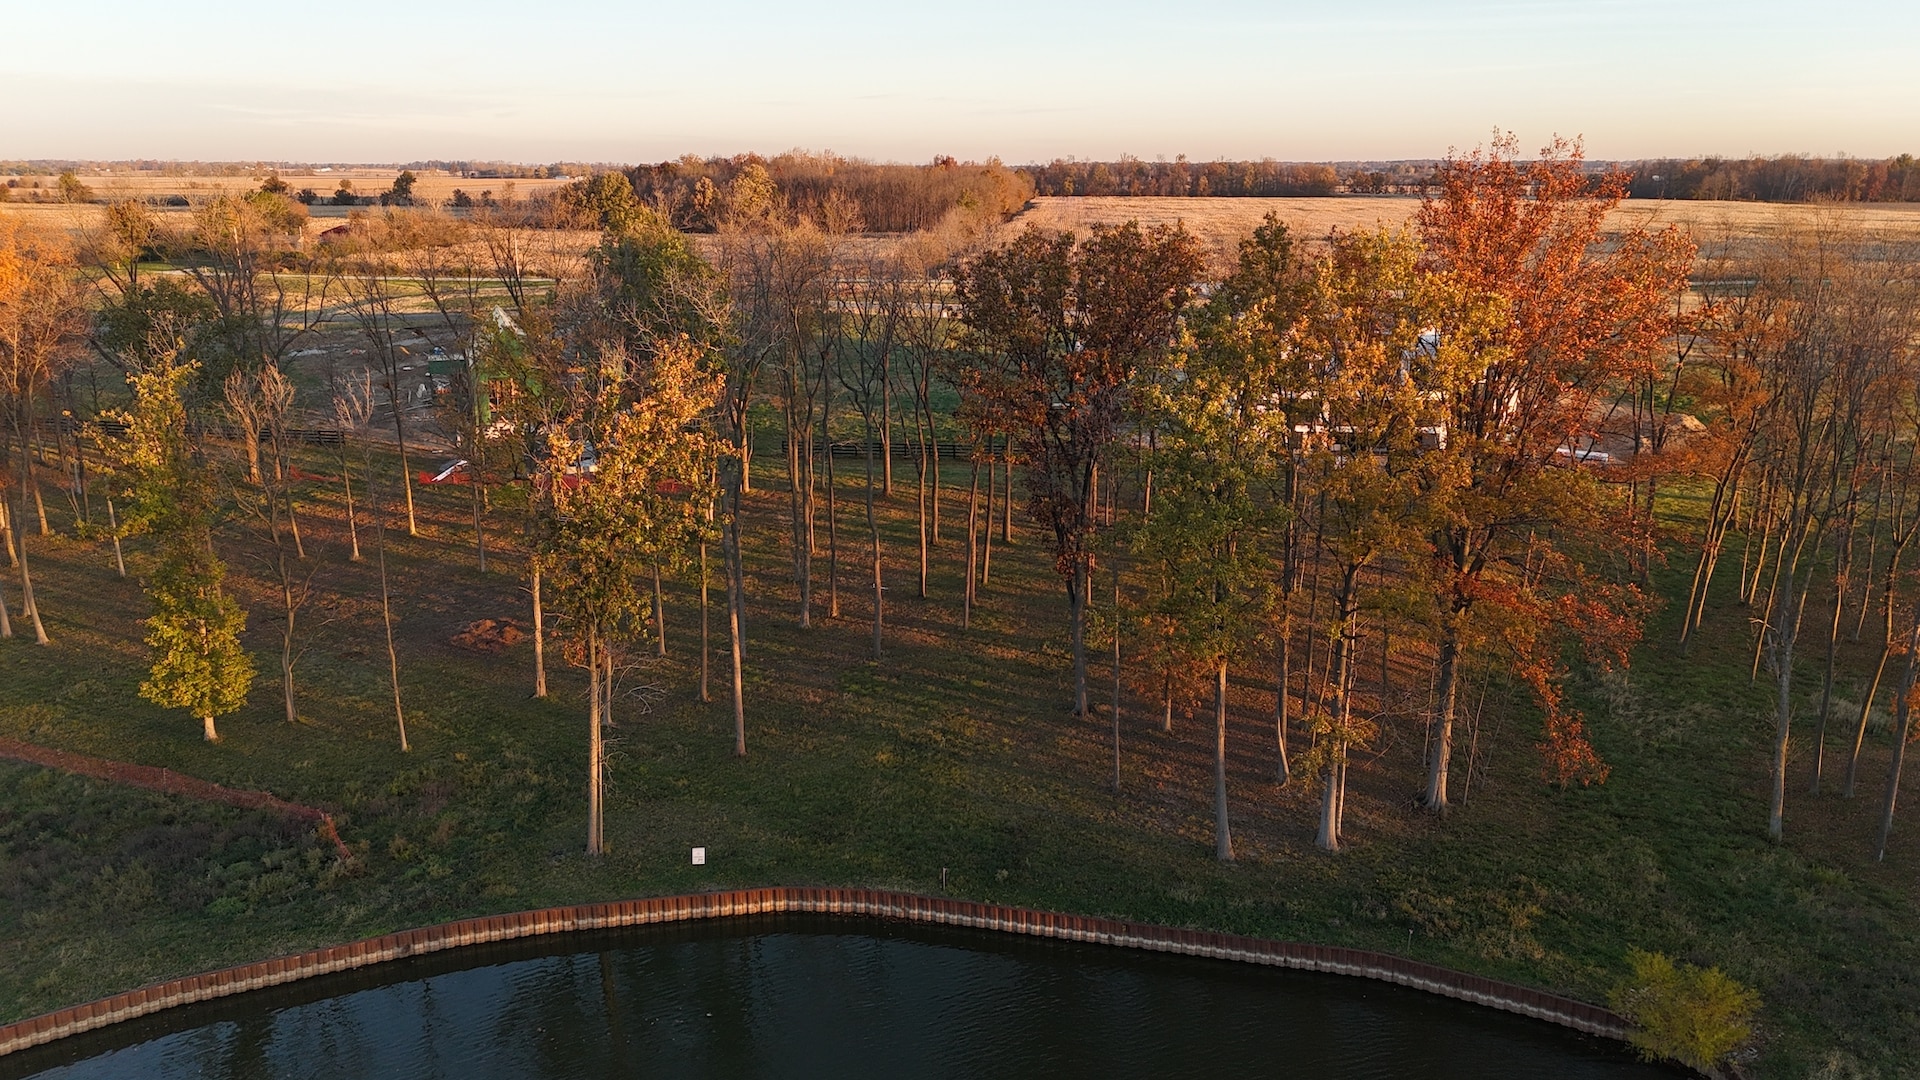 An aerial view of a field with trees, a pond, and custom homes in Indiana.